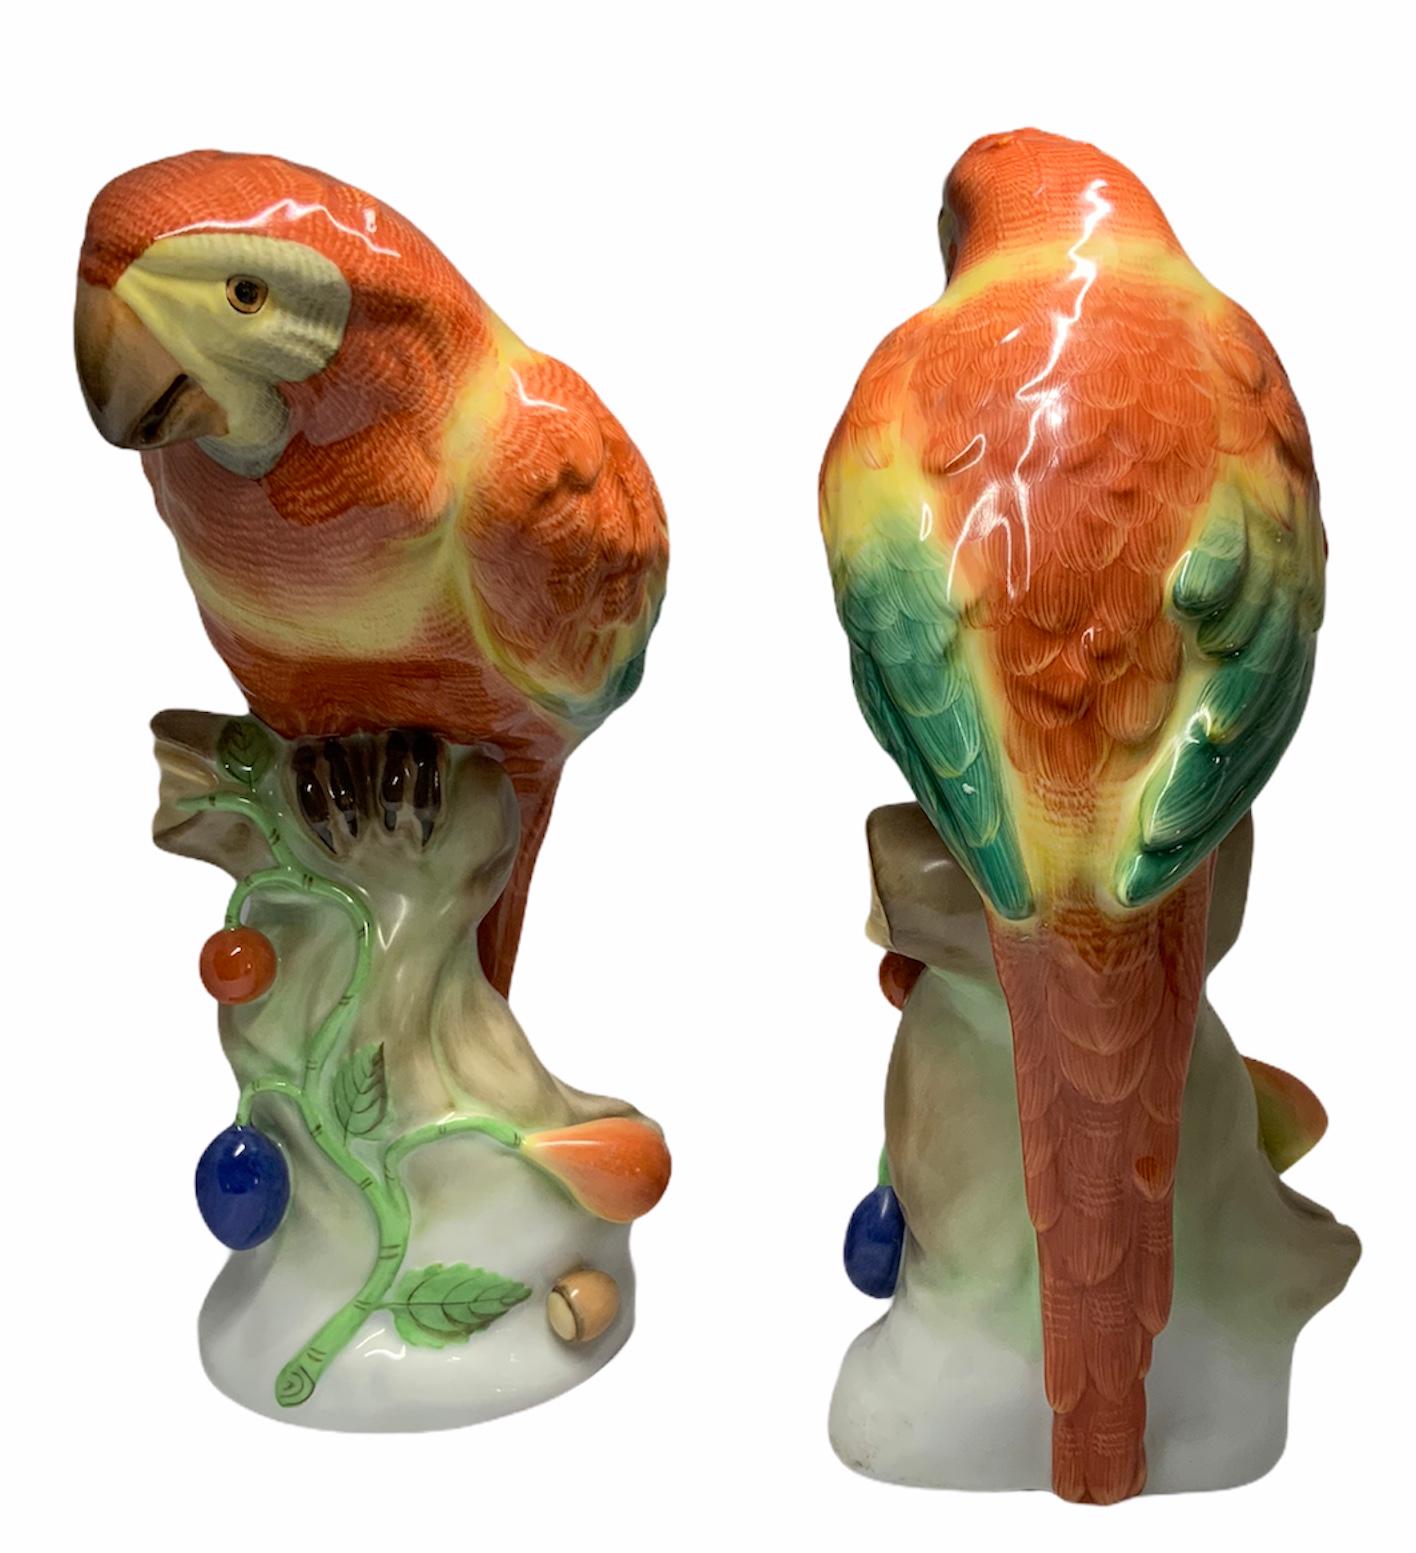 This is a pair of hand painted parrots in tropical colors of orange,green & yellow. They are standing over a wood branches that have some vines with fruits hanging from it. Under the base is the Herend hallmark.